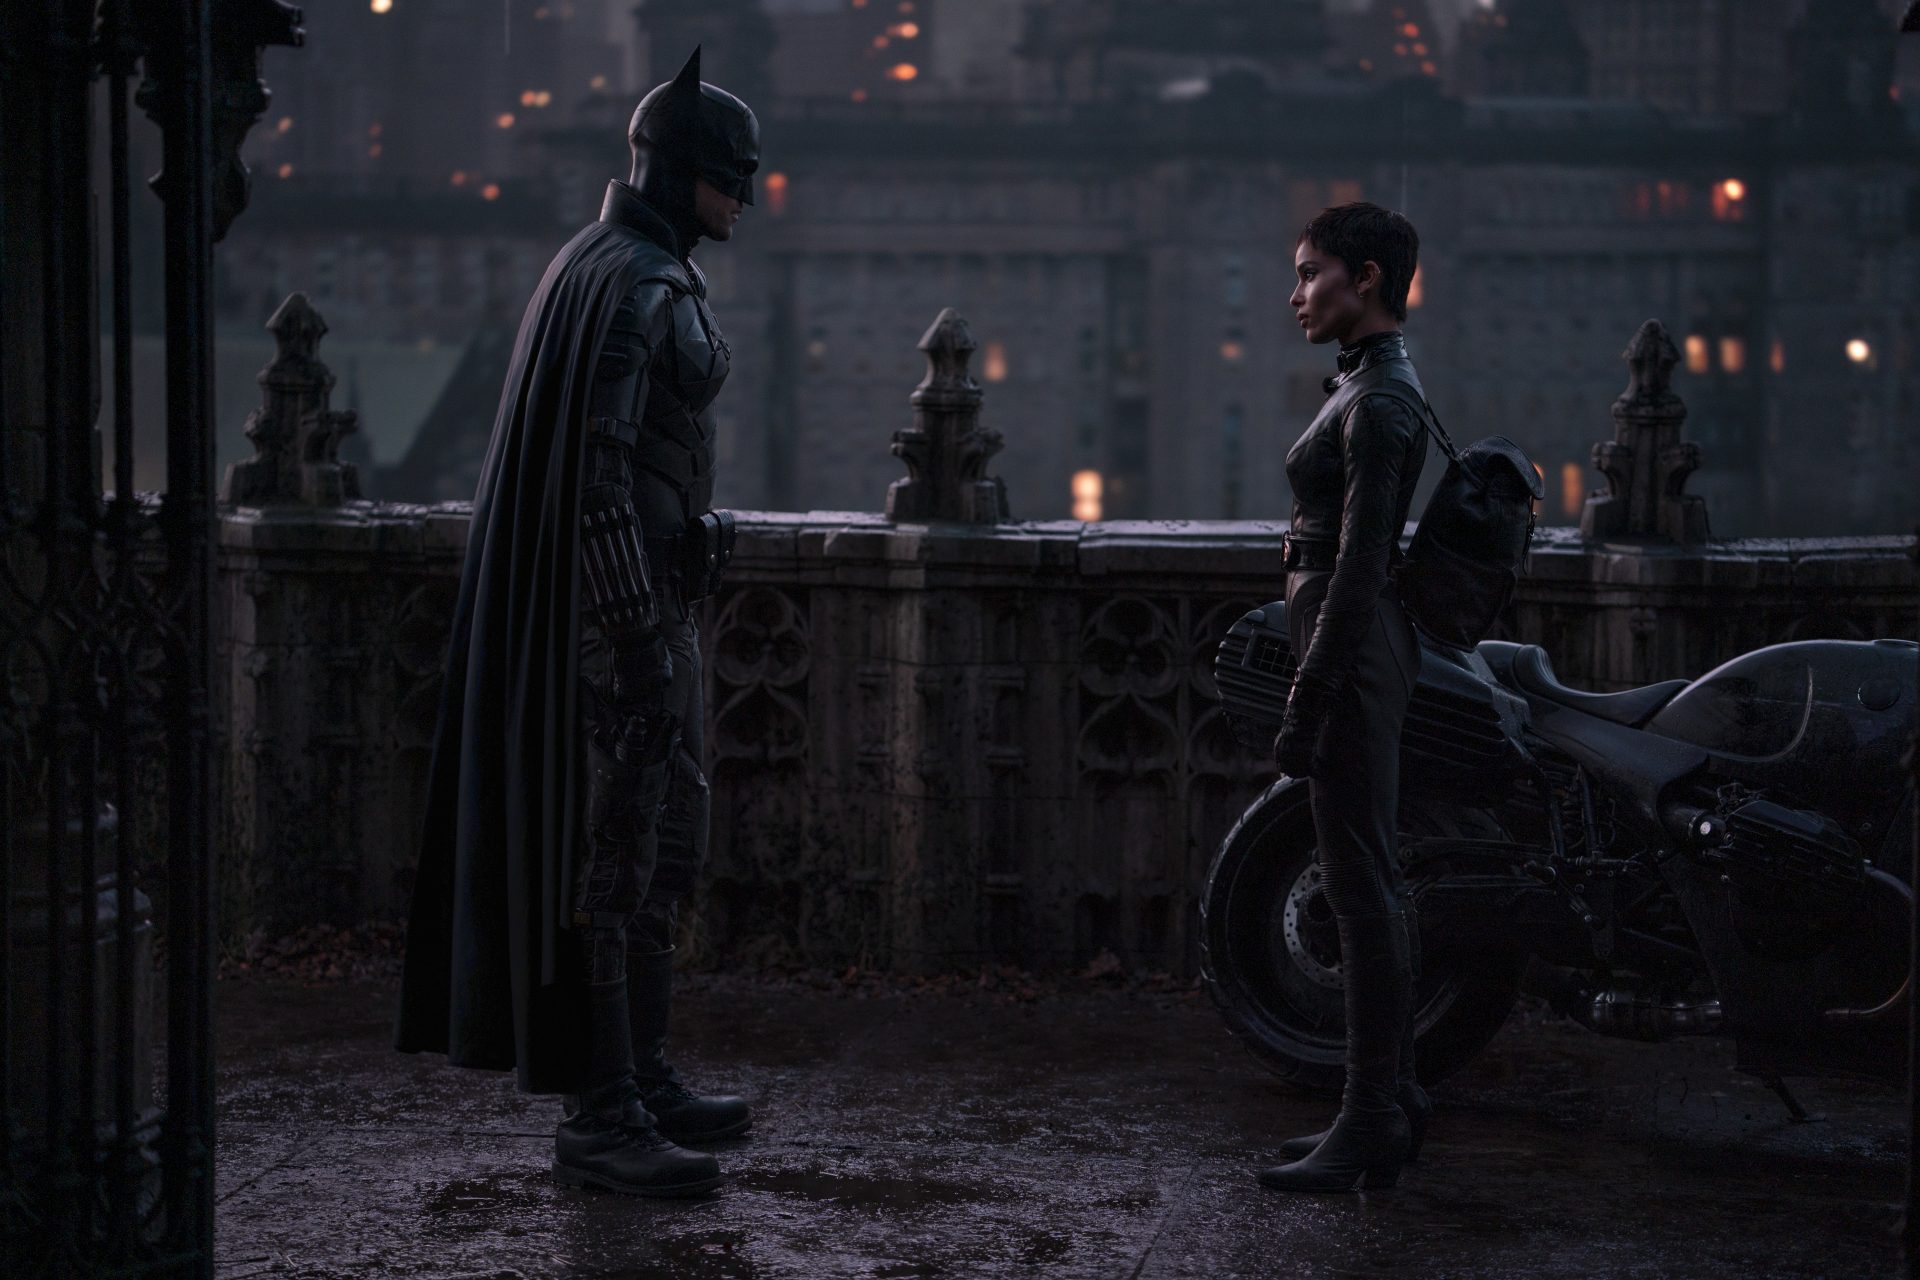 New THE BATMAN Image Reveal The Riddler, Penguin, and More